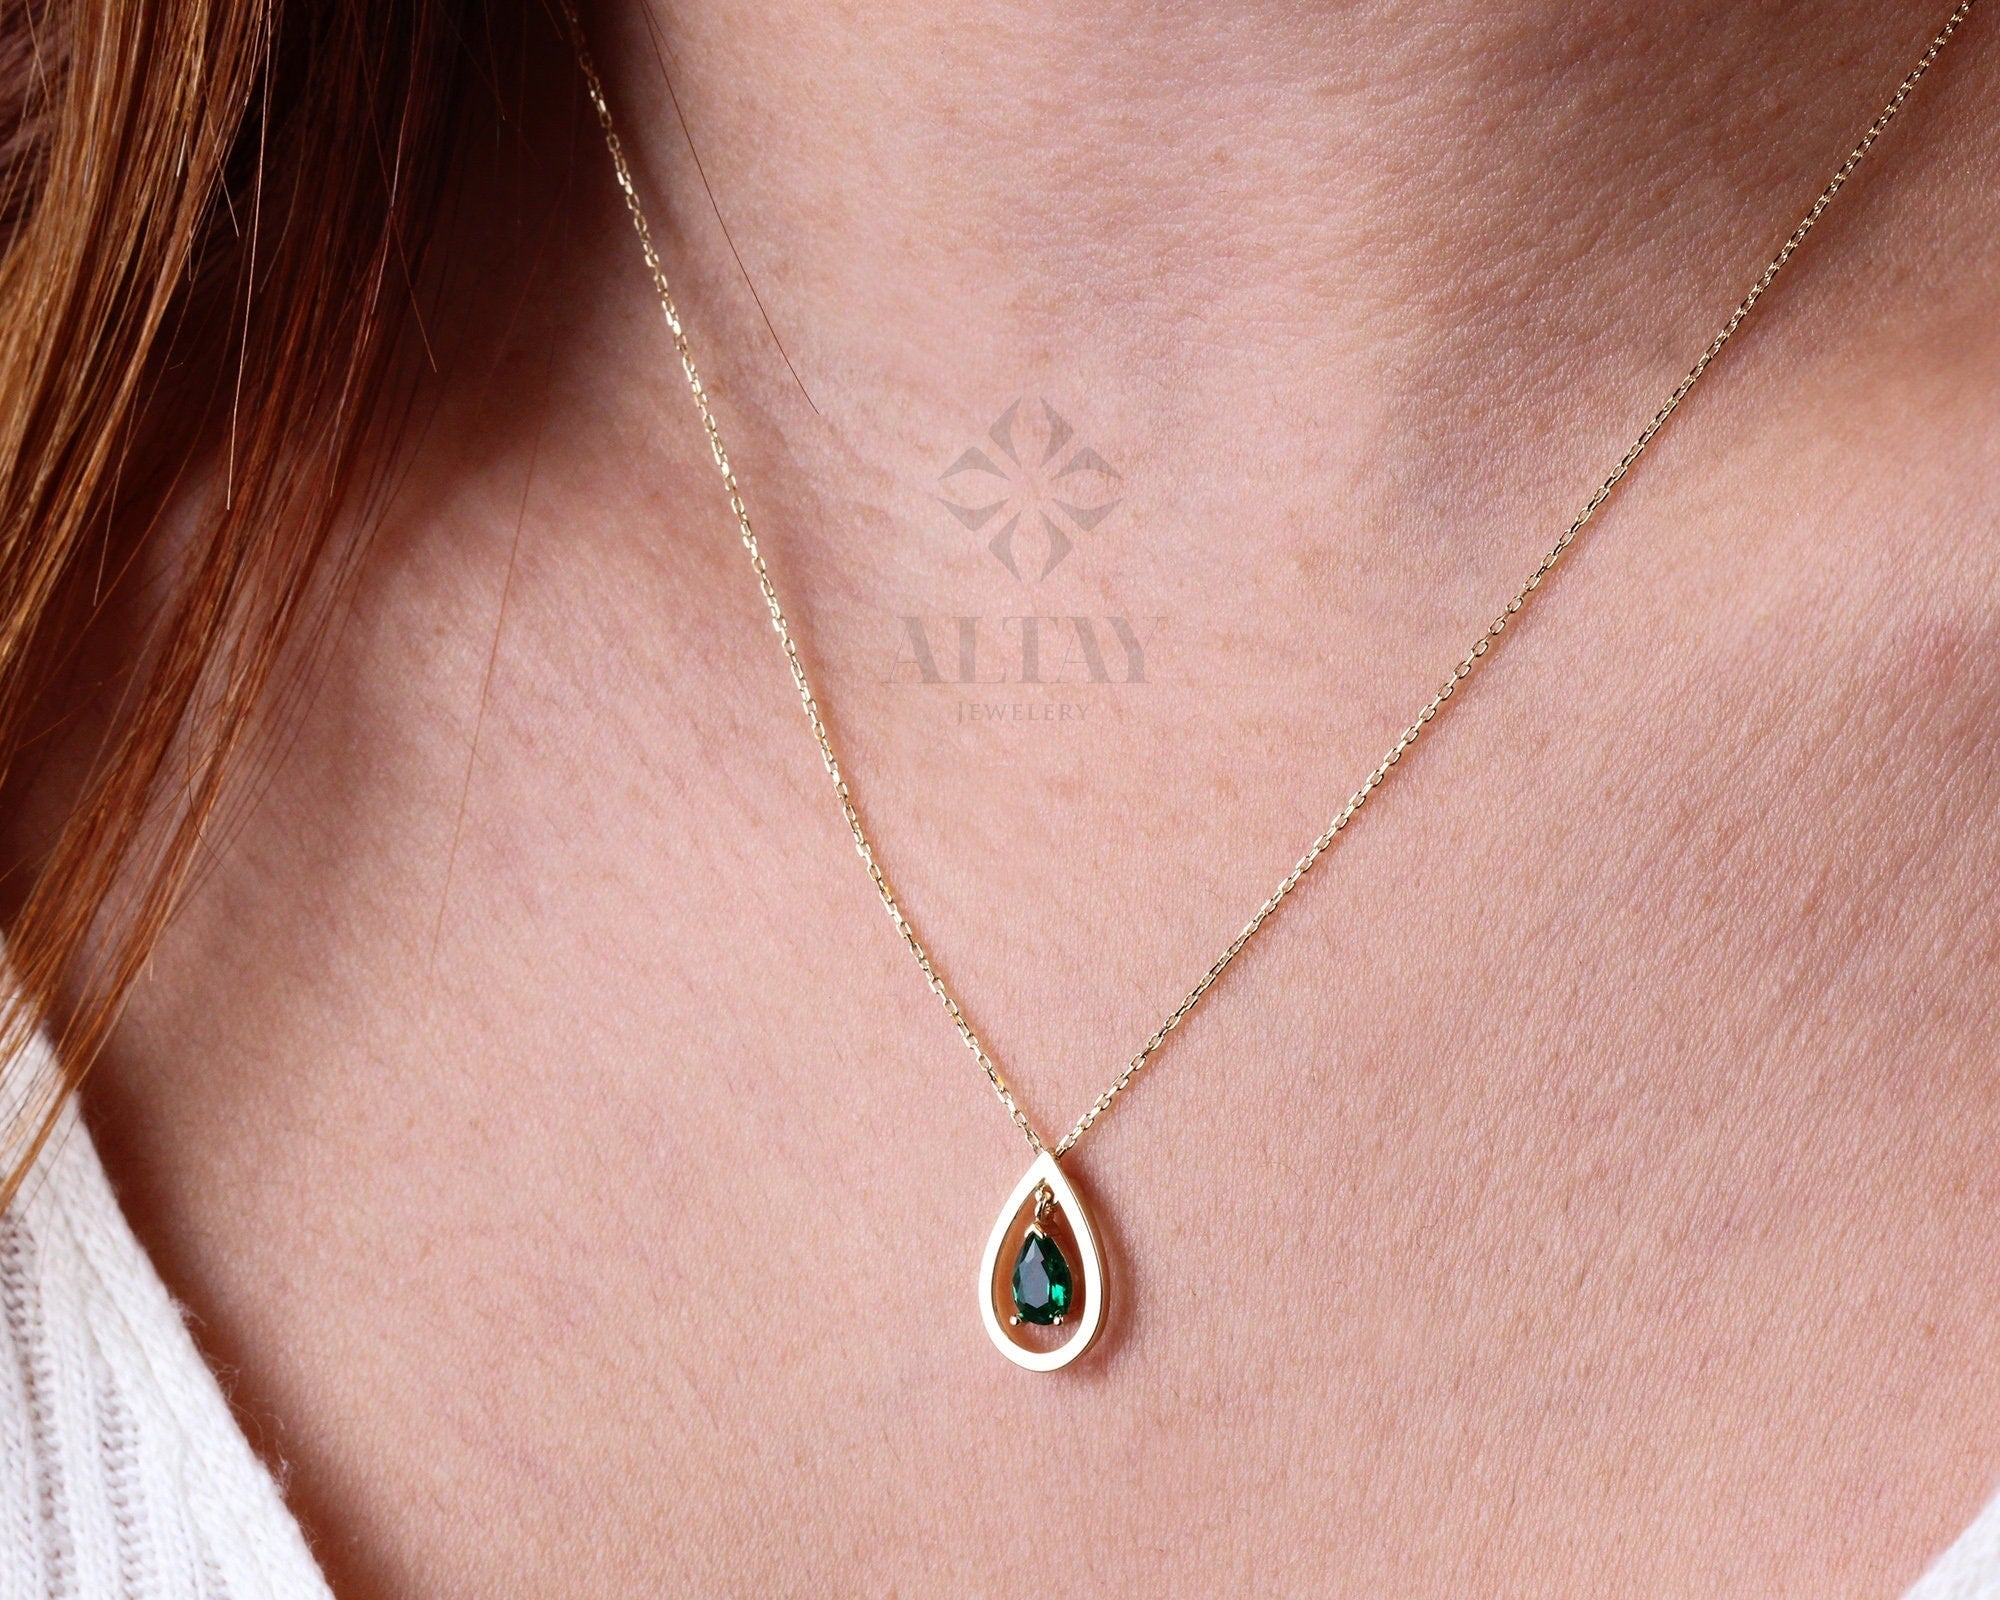 14K Gold Emerald Necklace, Pear Shape Emerald Pendant, Teardrop Green Charm, May Birthstone, Dainty Emerald Necklace, Anniversary Gift